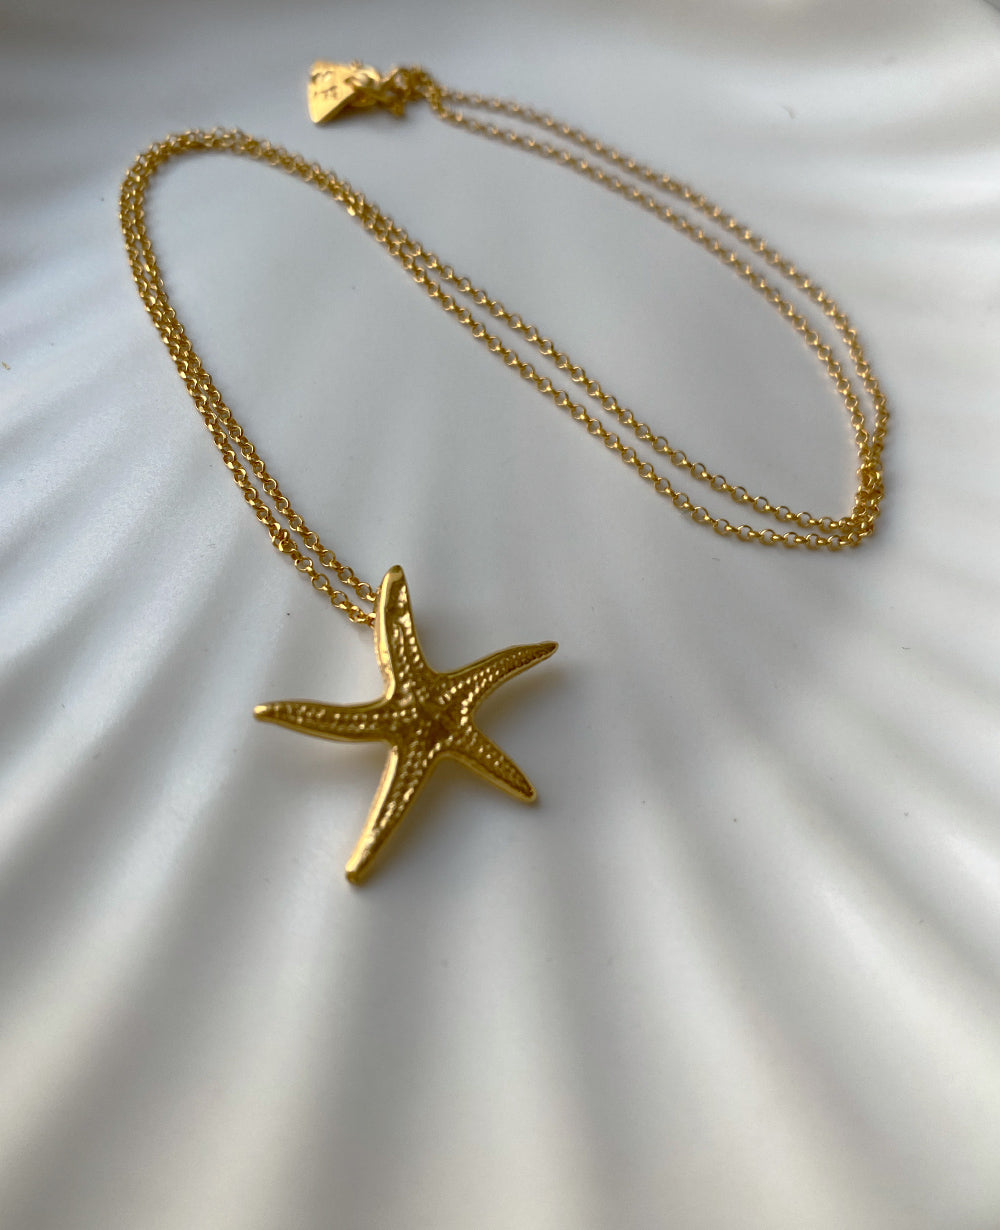 NECKLACE "STARFISH" GOLD